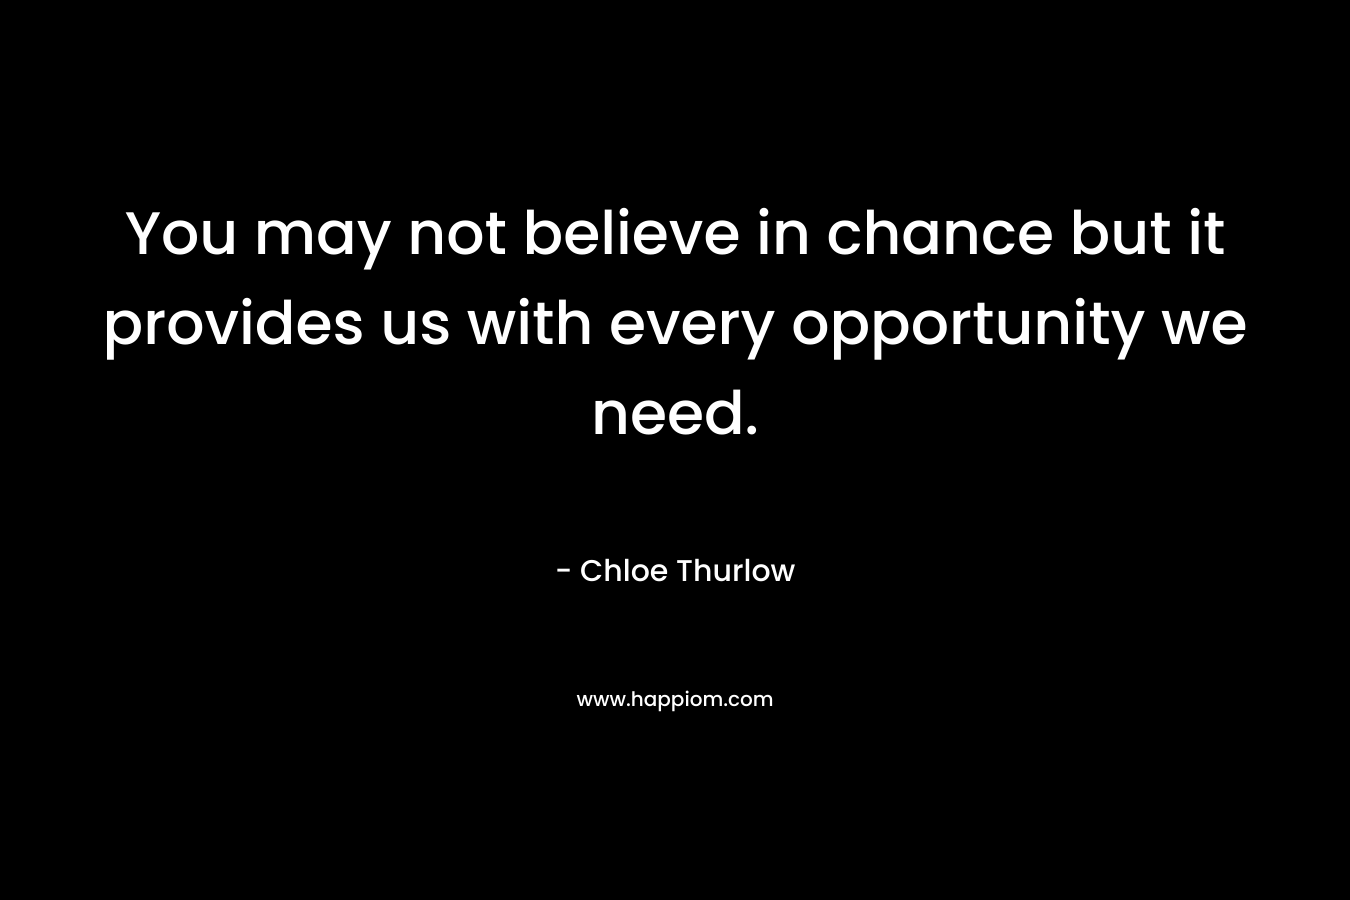 You may not believe in chance but it provides us with every opportunity we need. – Chloe Thurlow